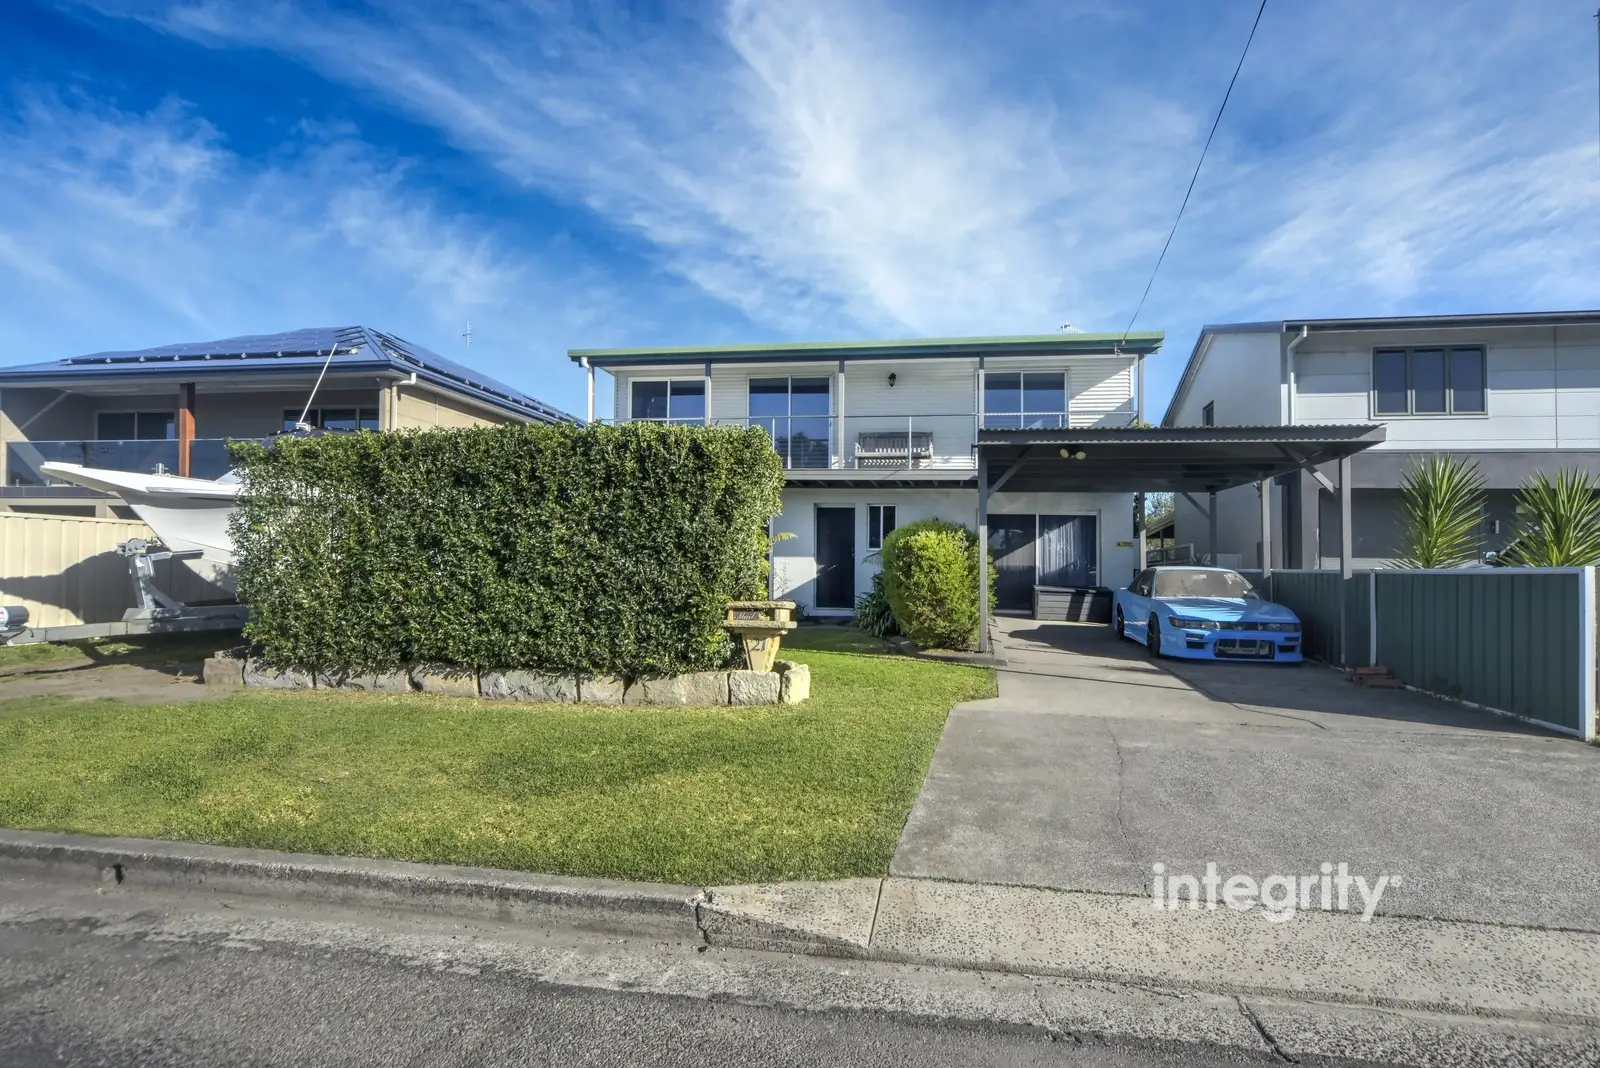 21 Haiser Road, Greenwell Point For Sale by Integrity Real Estate - image 11